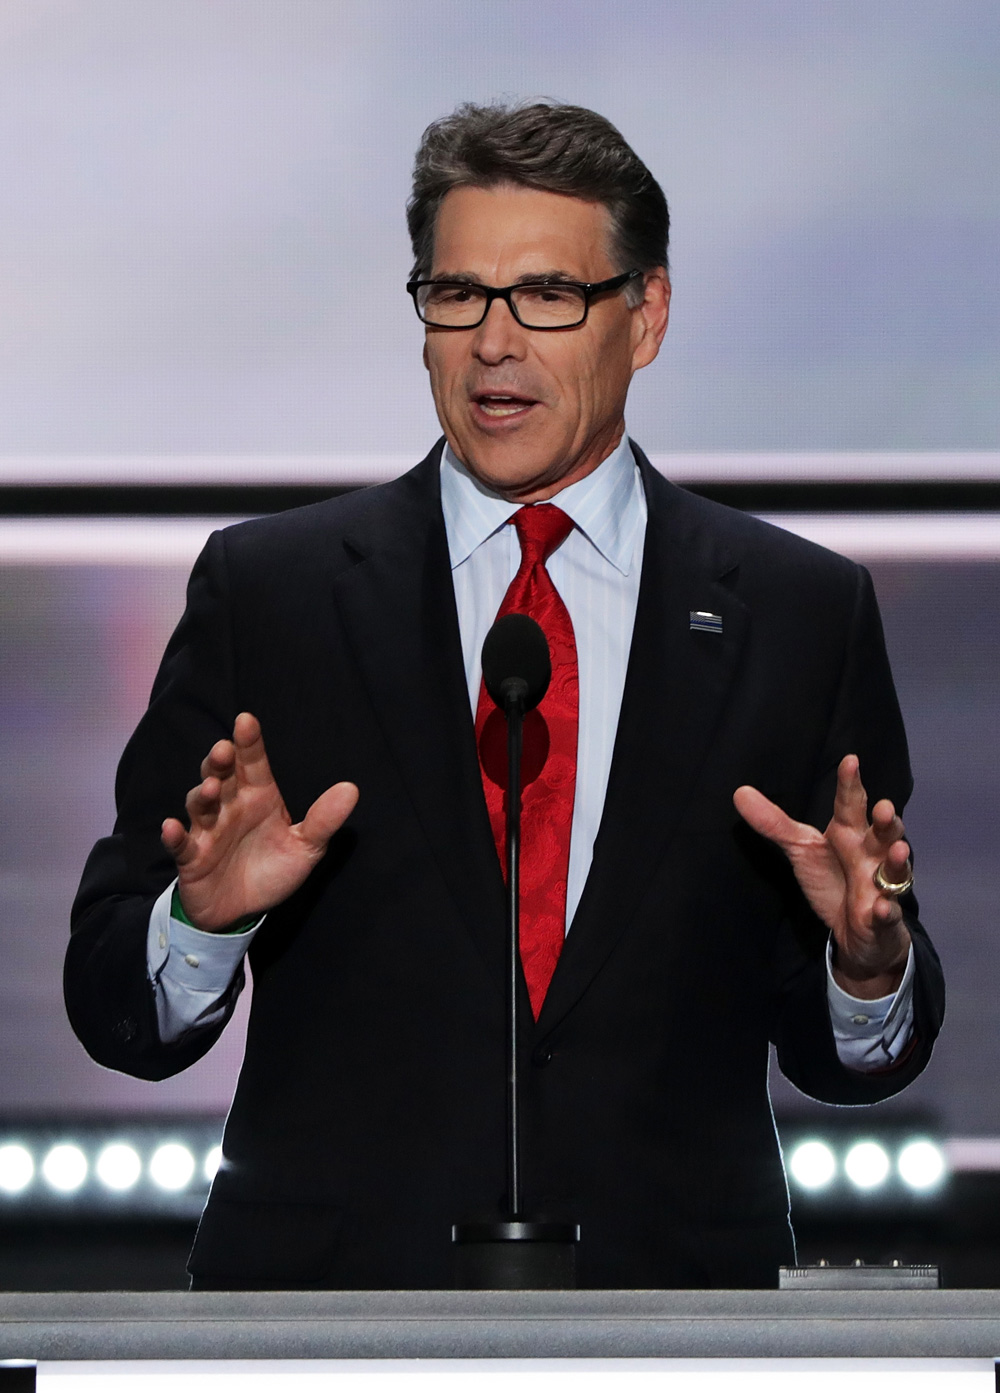 Rick Perry at the Republican National Convention earlier this year.